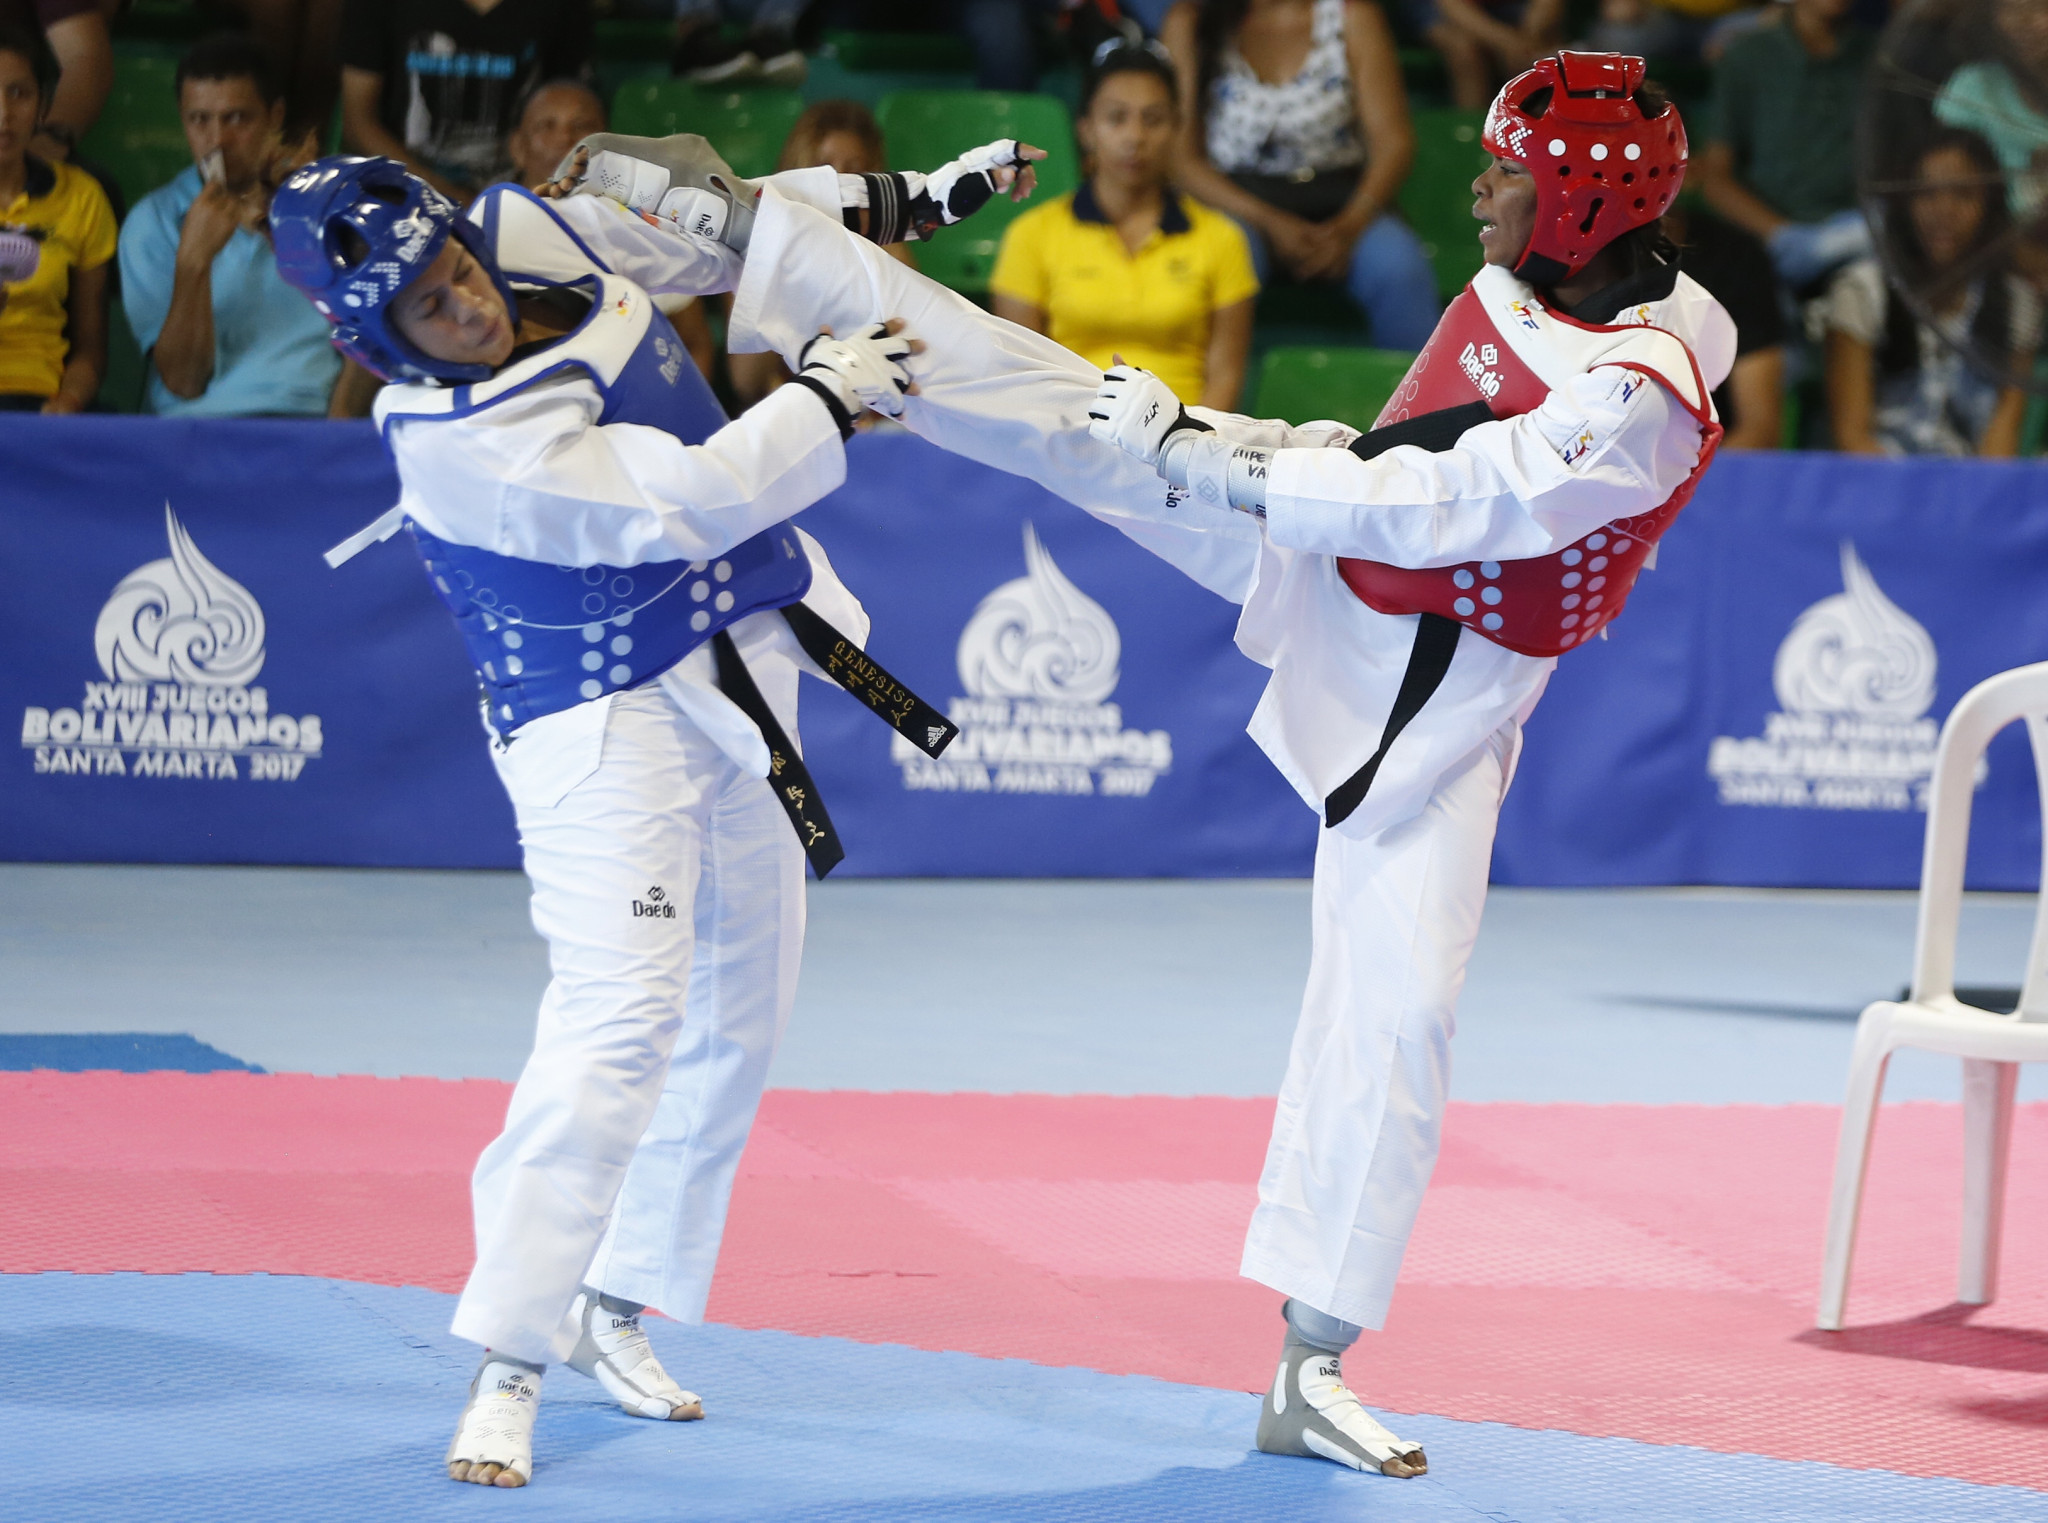 Venezuelan taekwondo athletes will have a chance to qualify for the Lima 2019 Pan American Games after Panam Sports and the VOC came together to ensure they make the qualification event ©Getty Images